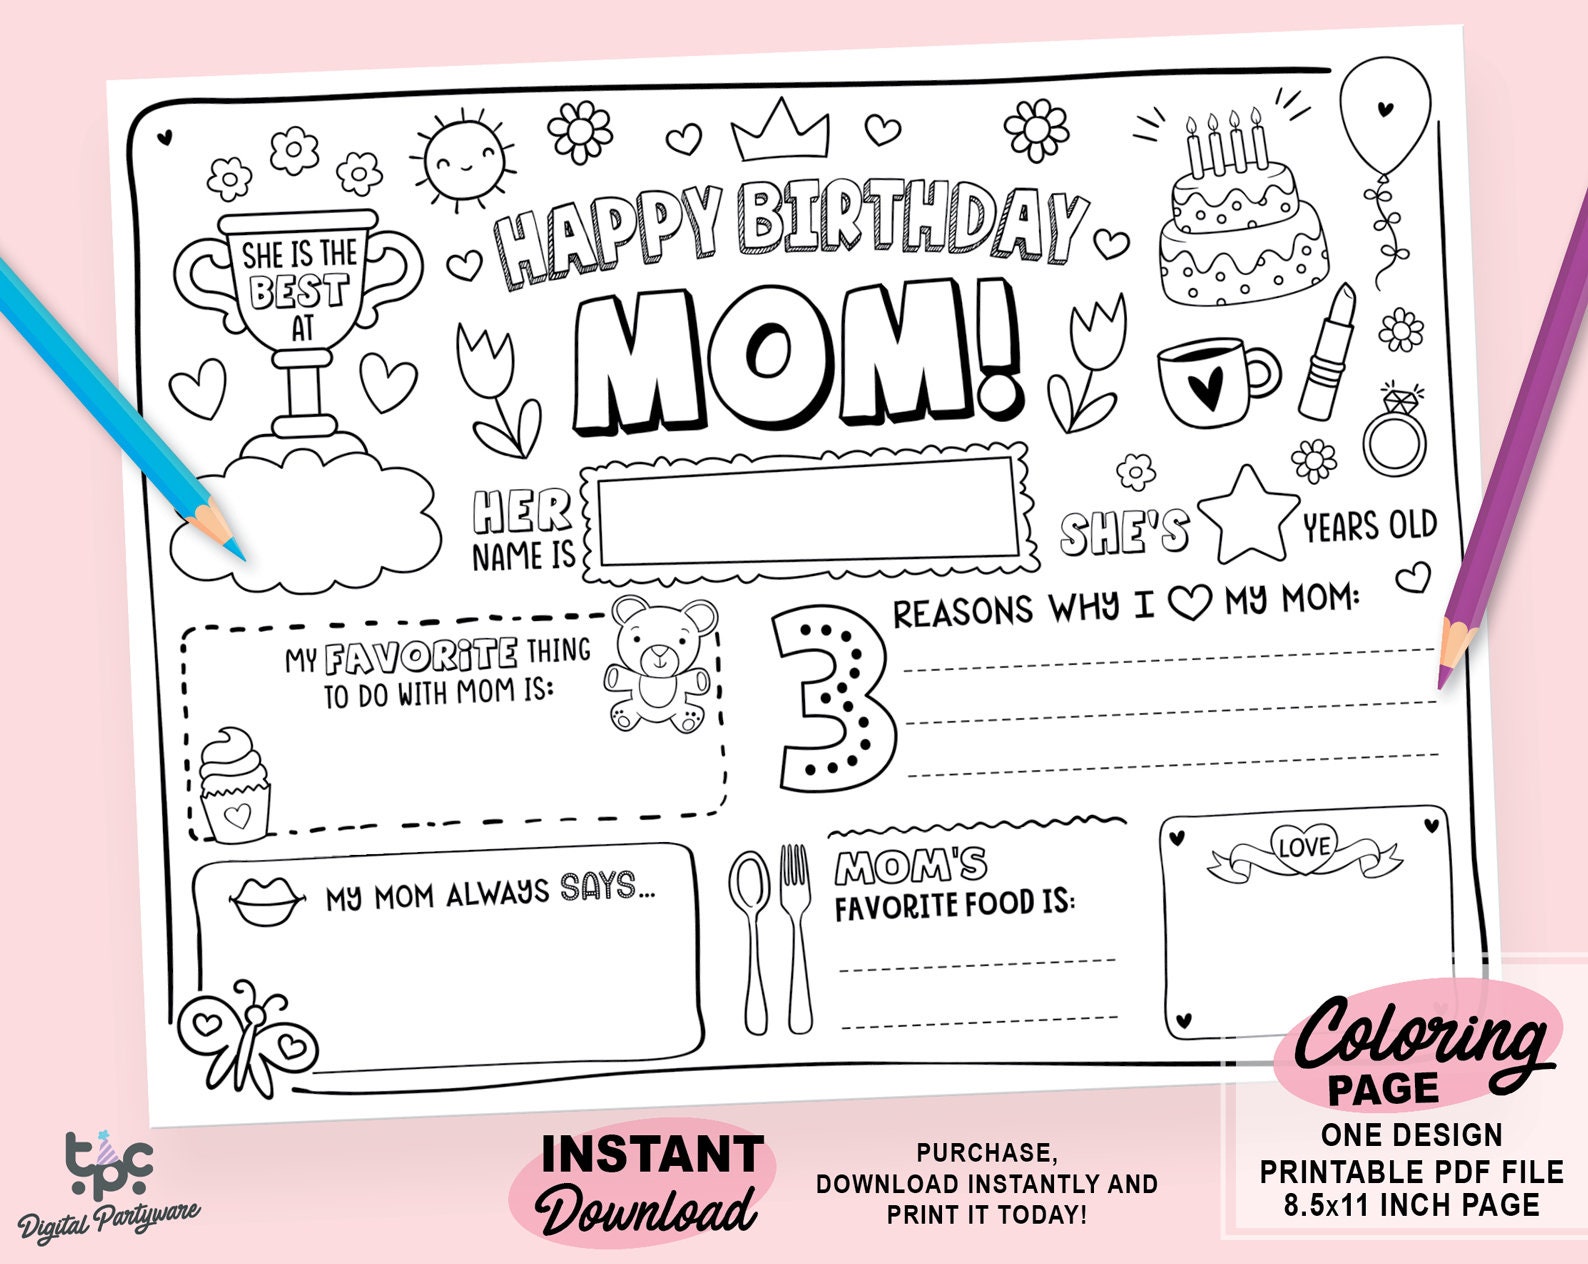 Happy birthday mom coloring page printable all about mom fill in template mothers birthday activity mommy birthday printable for kids